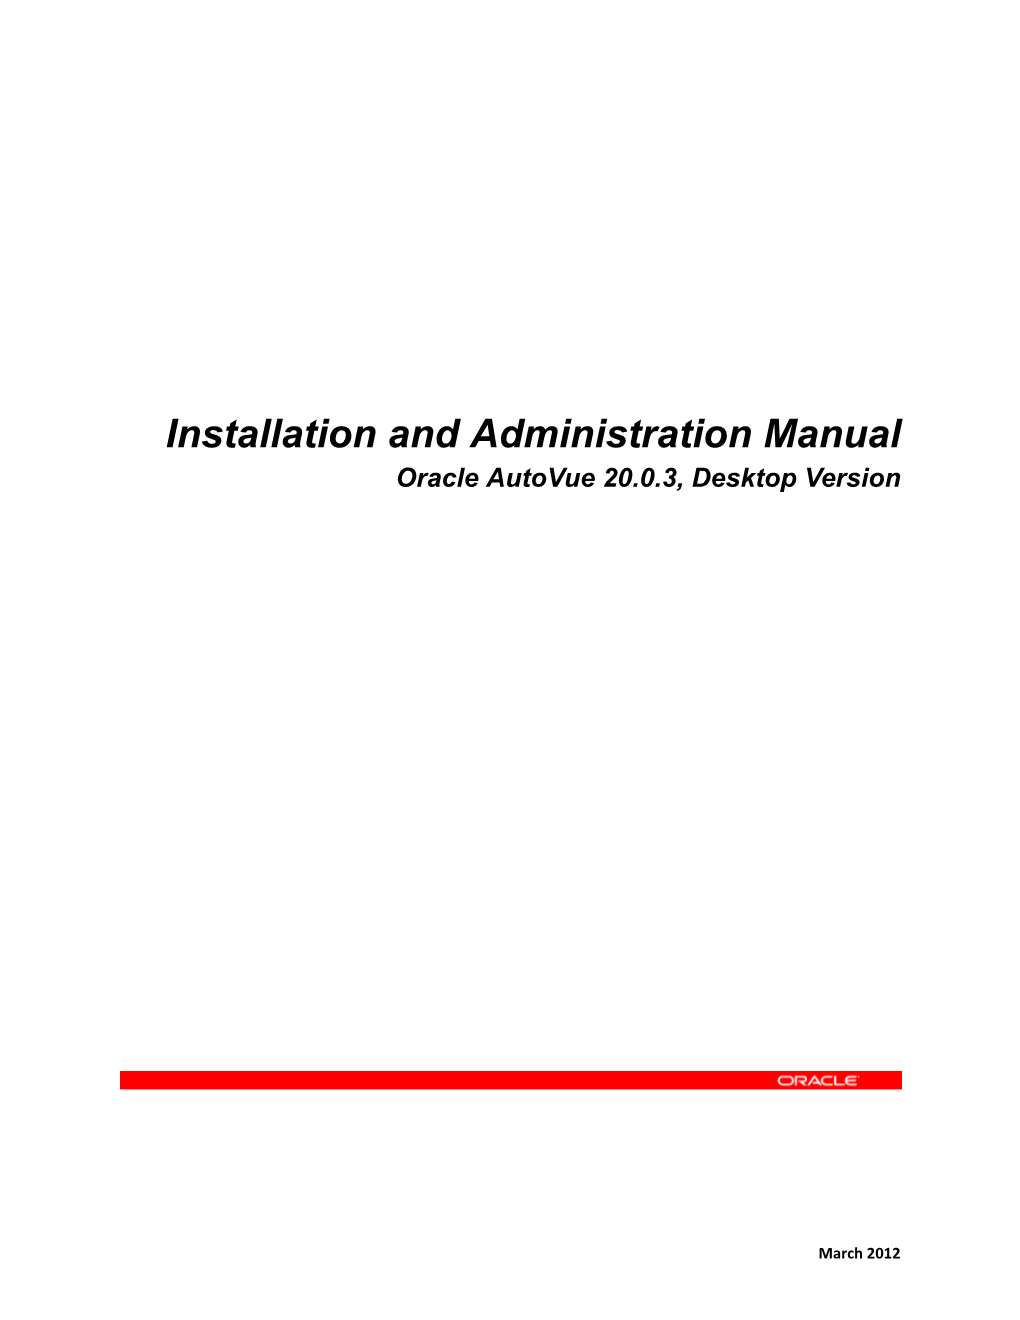 Installation and Administration Manual Oracle Autovue 20.0.3, Desktop Version